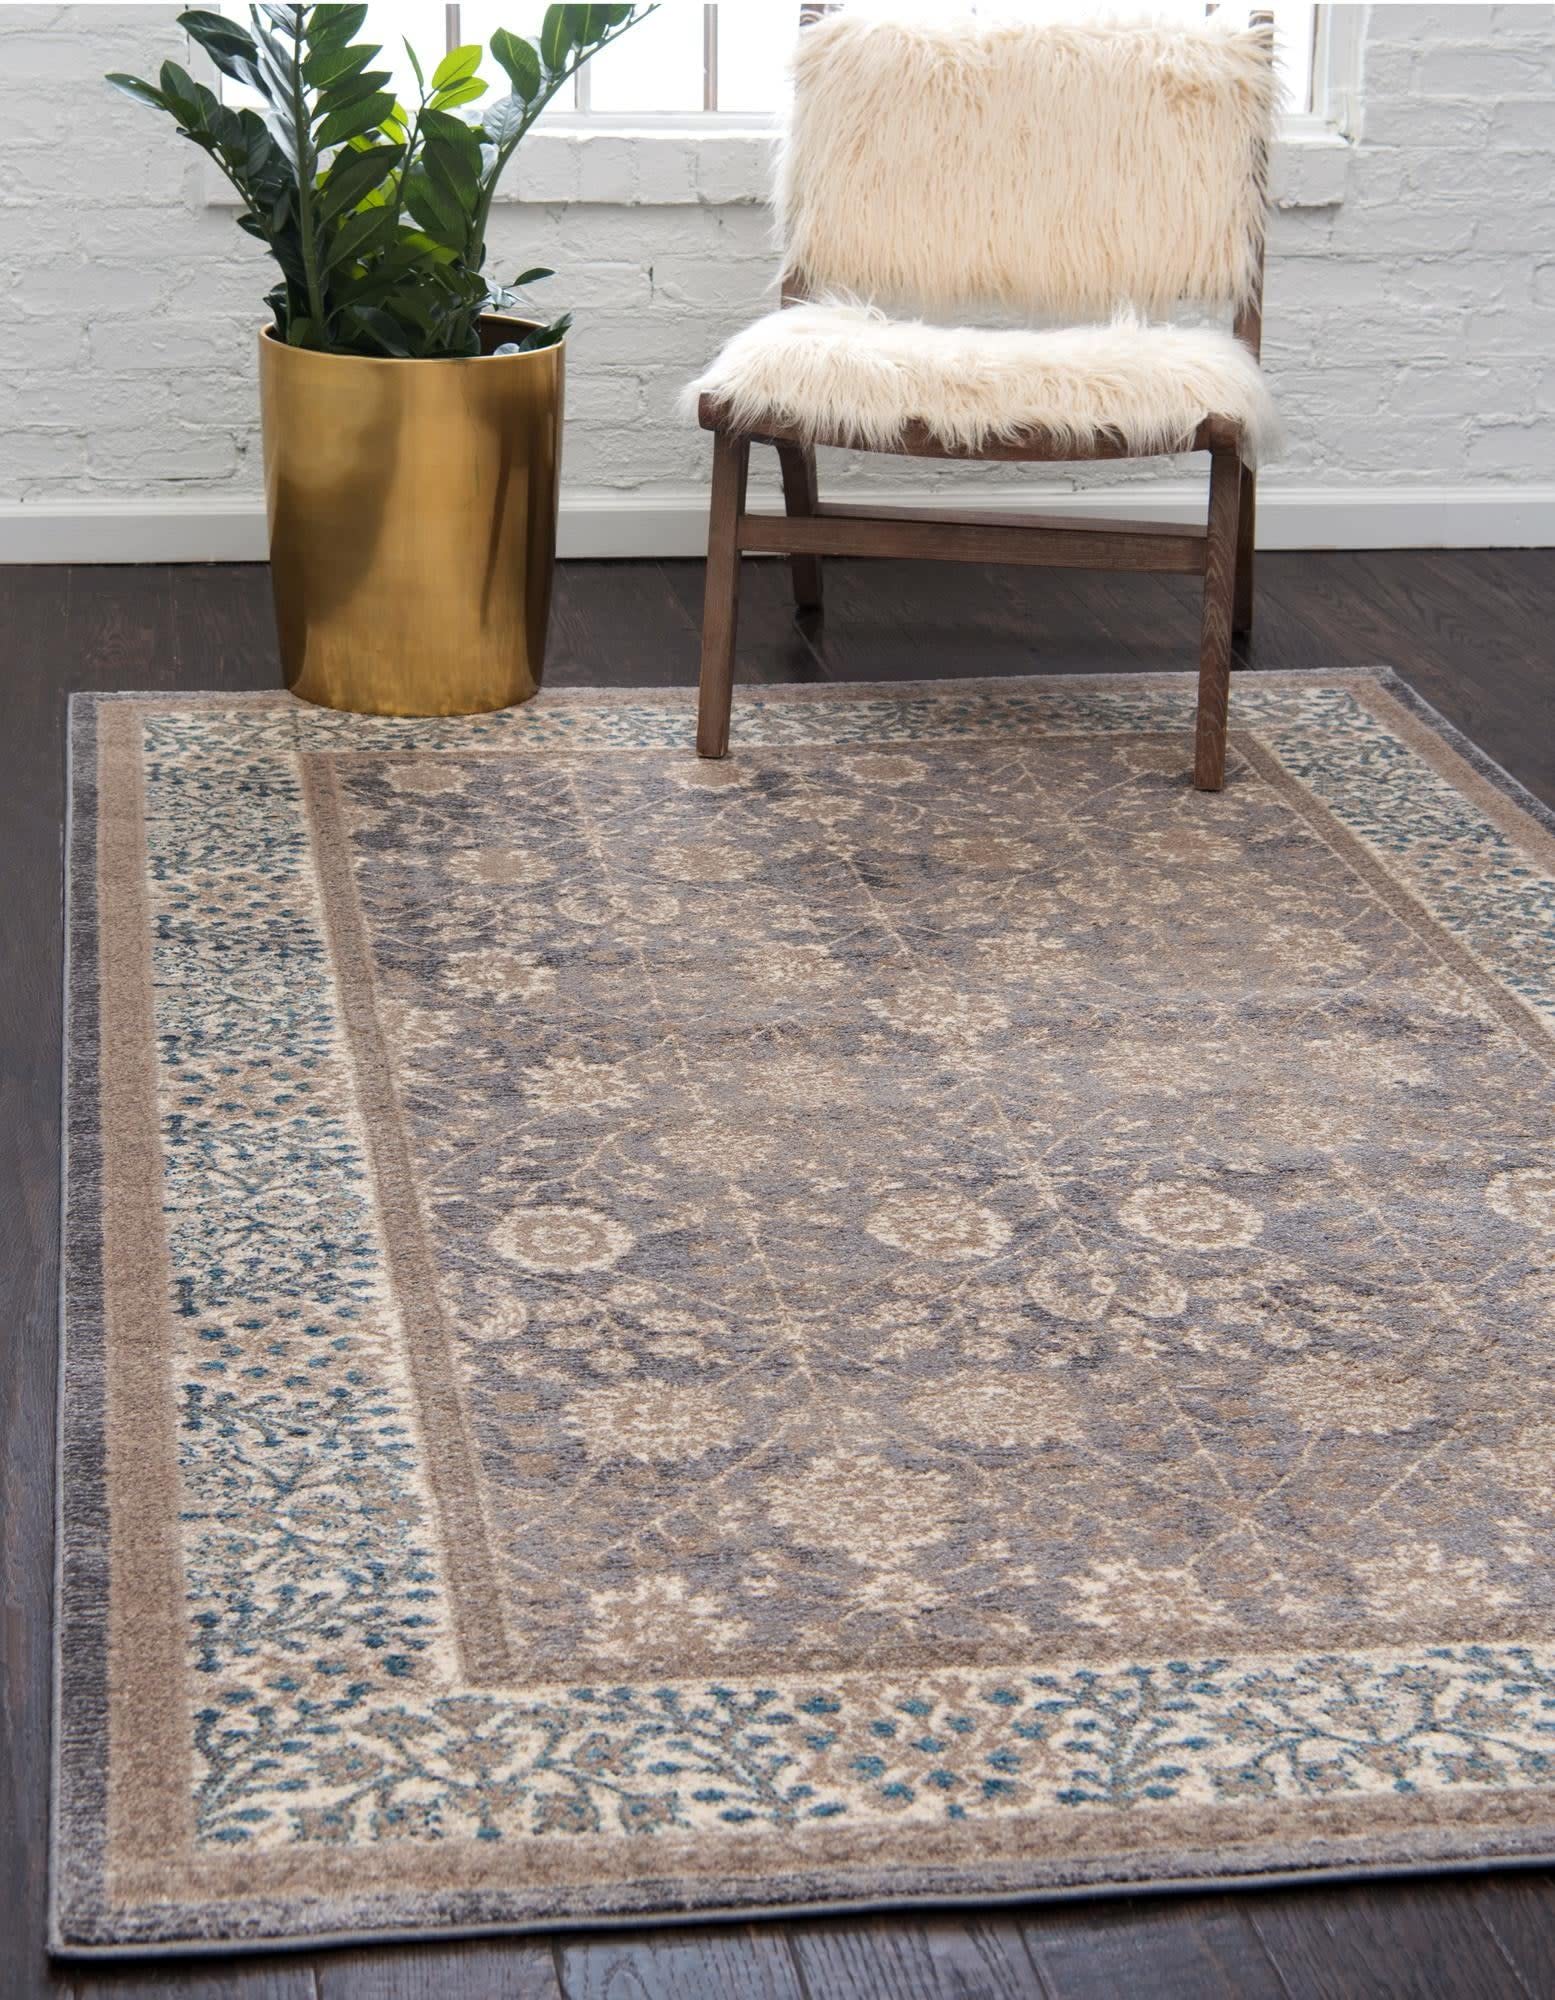 Unique Loom Salzburg Collection Classic Traditional Design Oriental Inspired with Intricate Border Area Rug, 3 ft 3 in x 5 ft 3 in, Light Brown/Gray